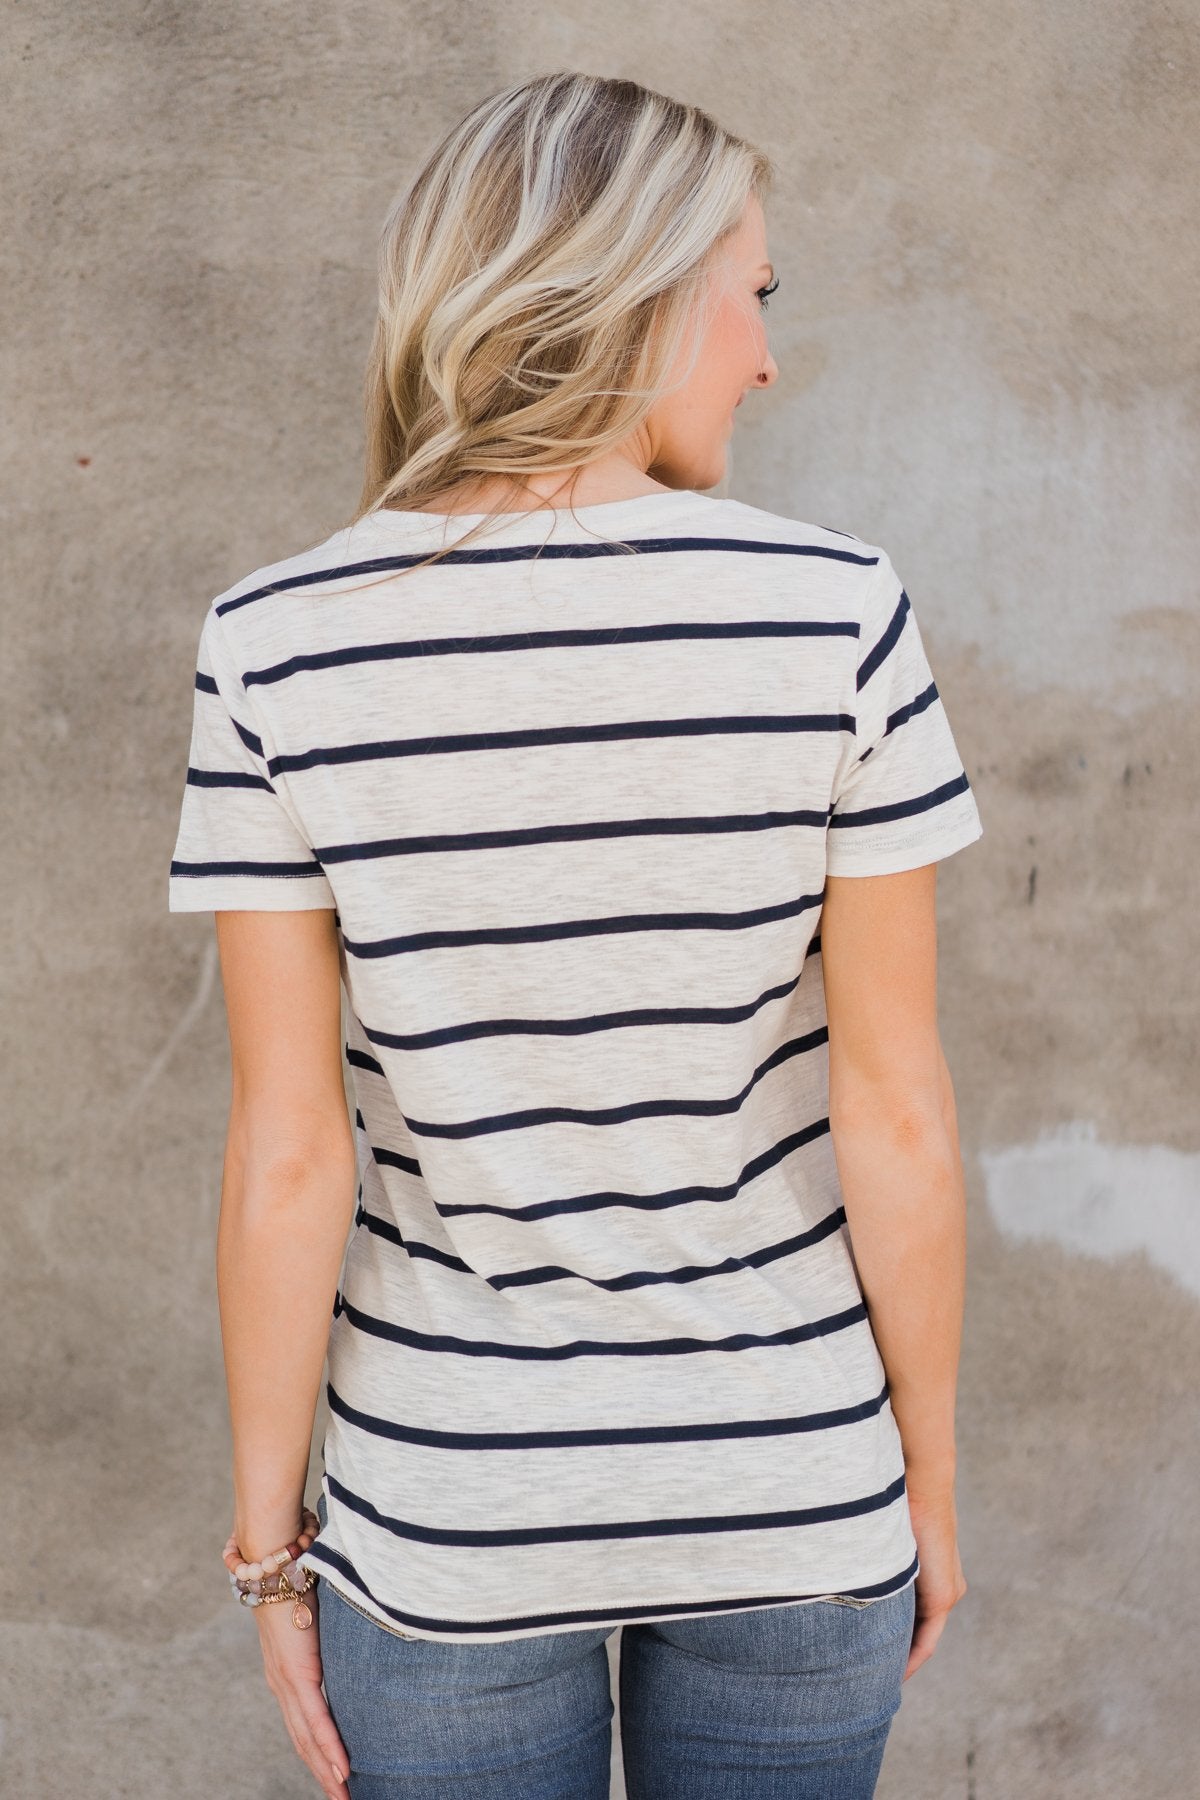 Side to Side Striped Pocket Top- Navy